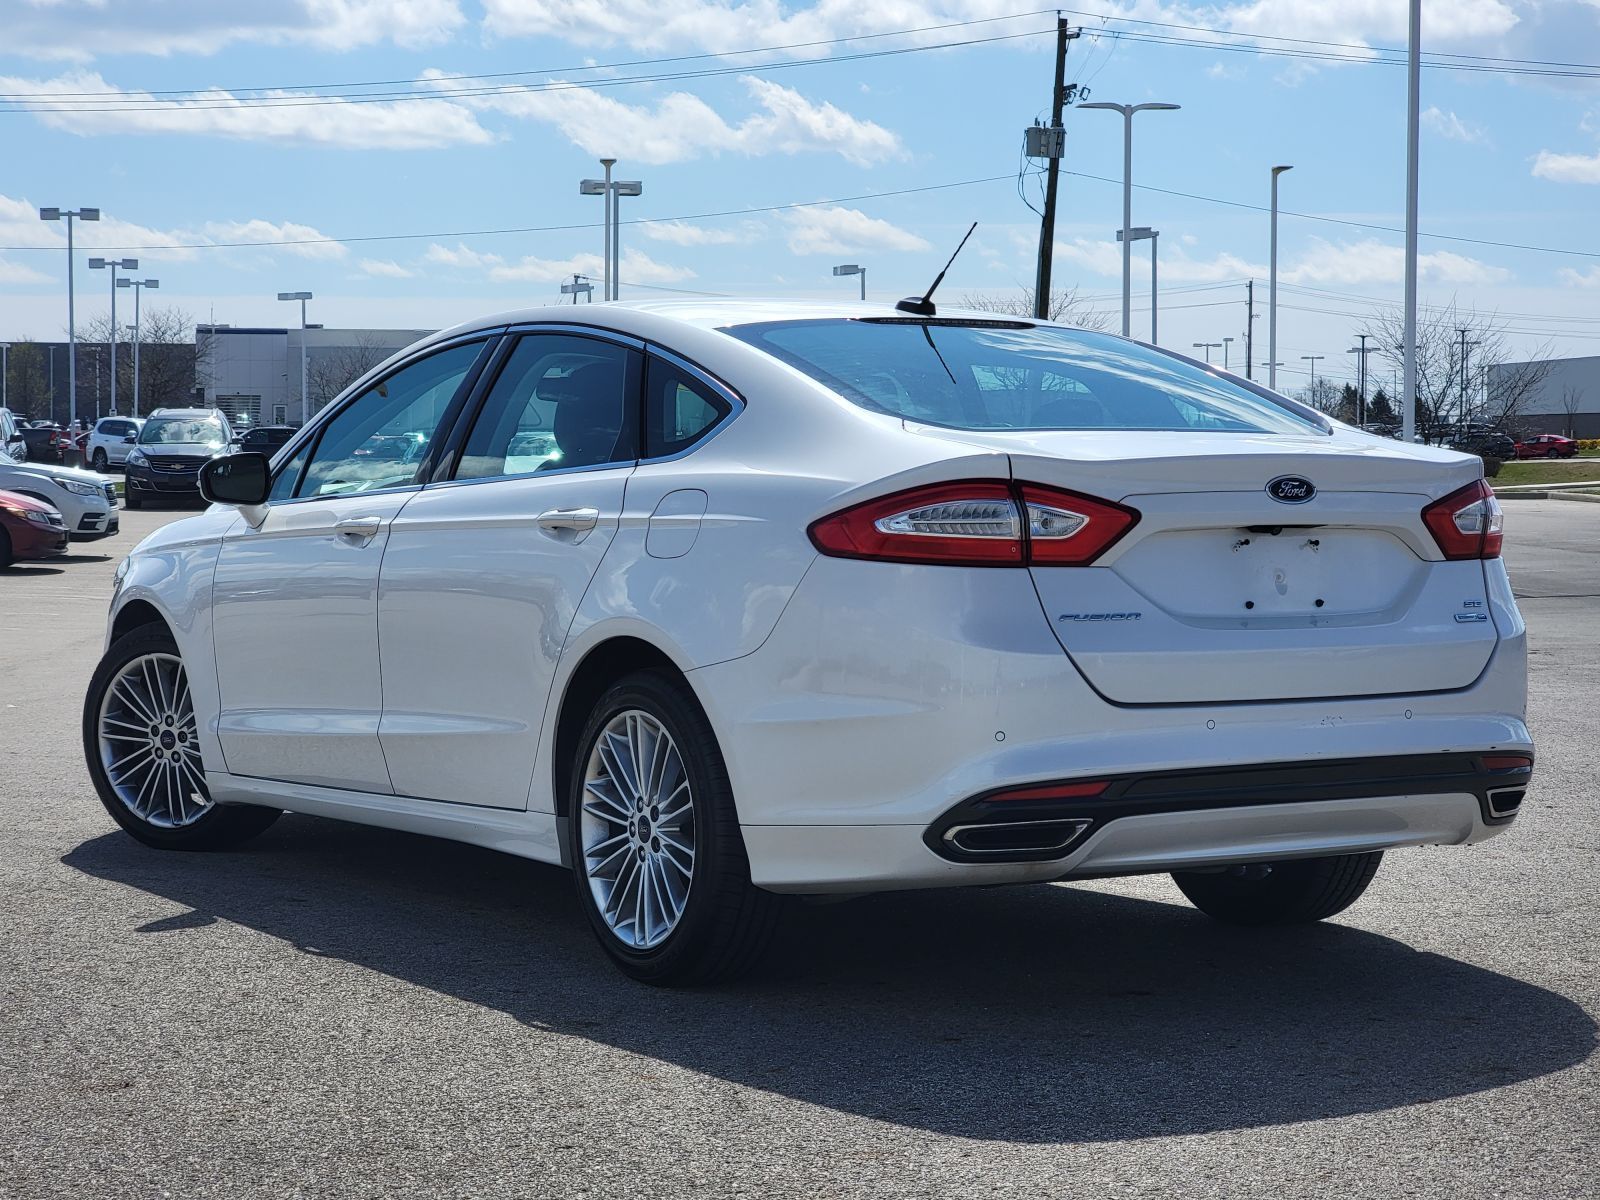 Used, 2015 Ford Fusion SE, White, 13946-13